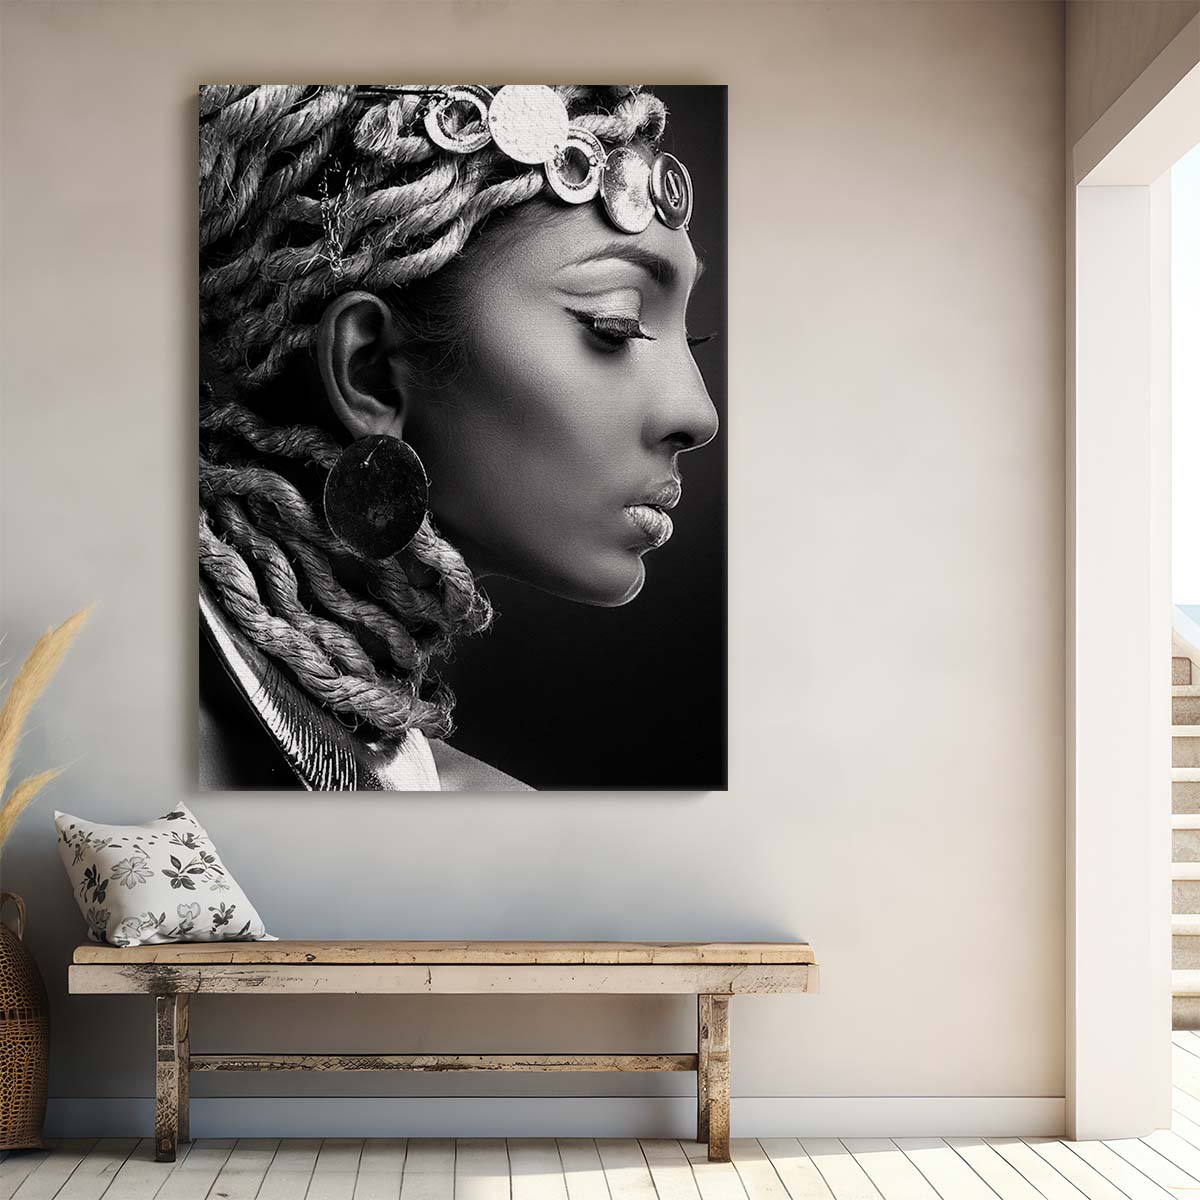 Serenely Tranquil Egyptian Woman Portrait in Monochrome Photography by Luxuriance Designs, made in USA